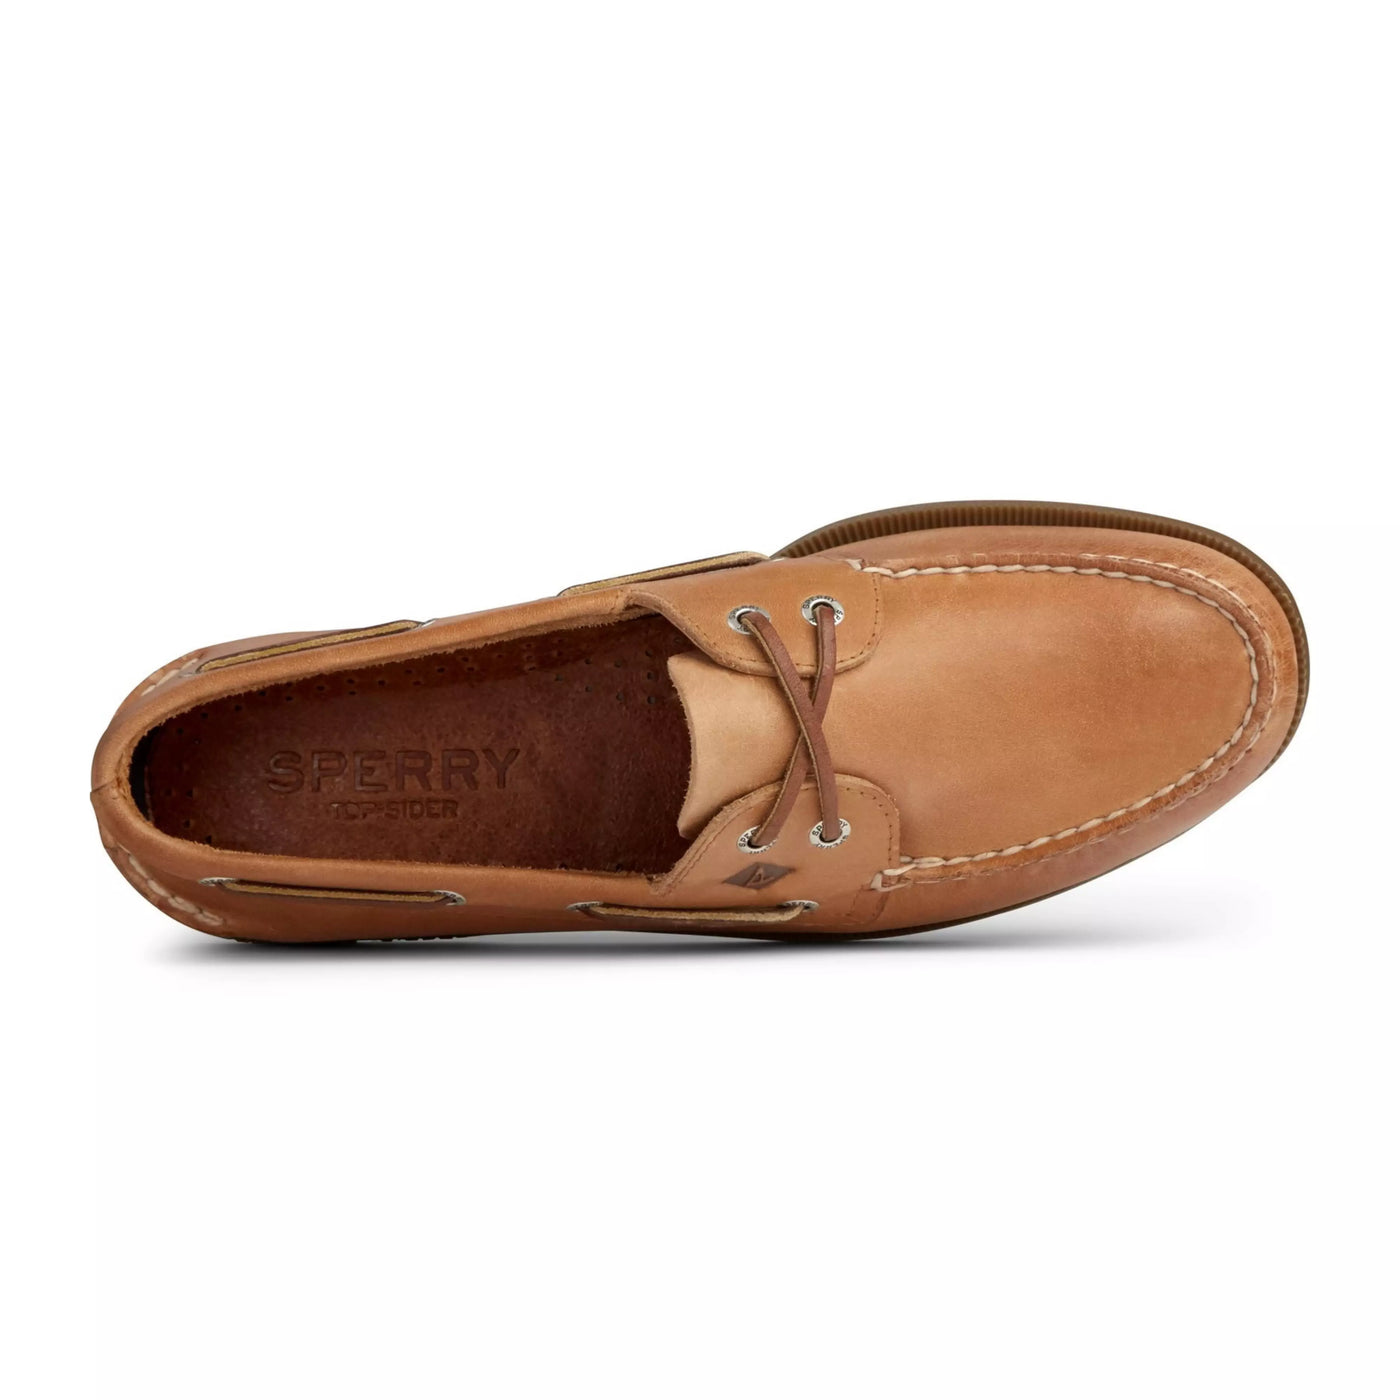 Nutmeg Authentic Original Leather Boat Shoe - Sperry - The Slipper Box